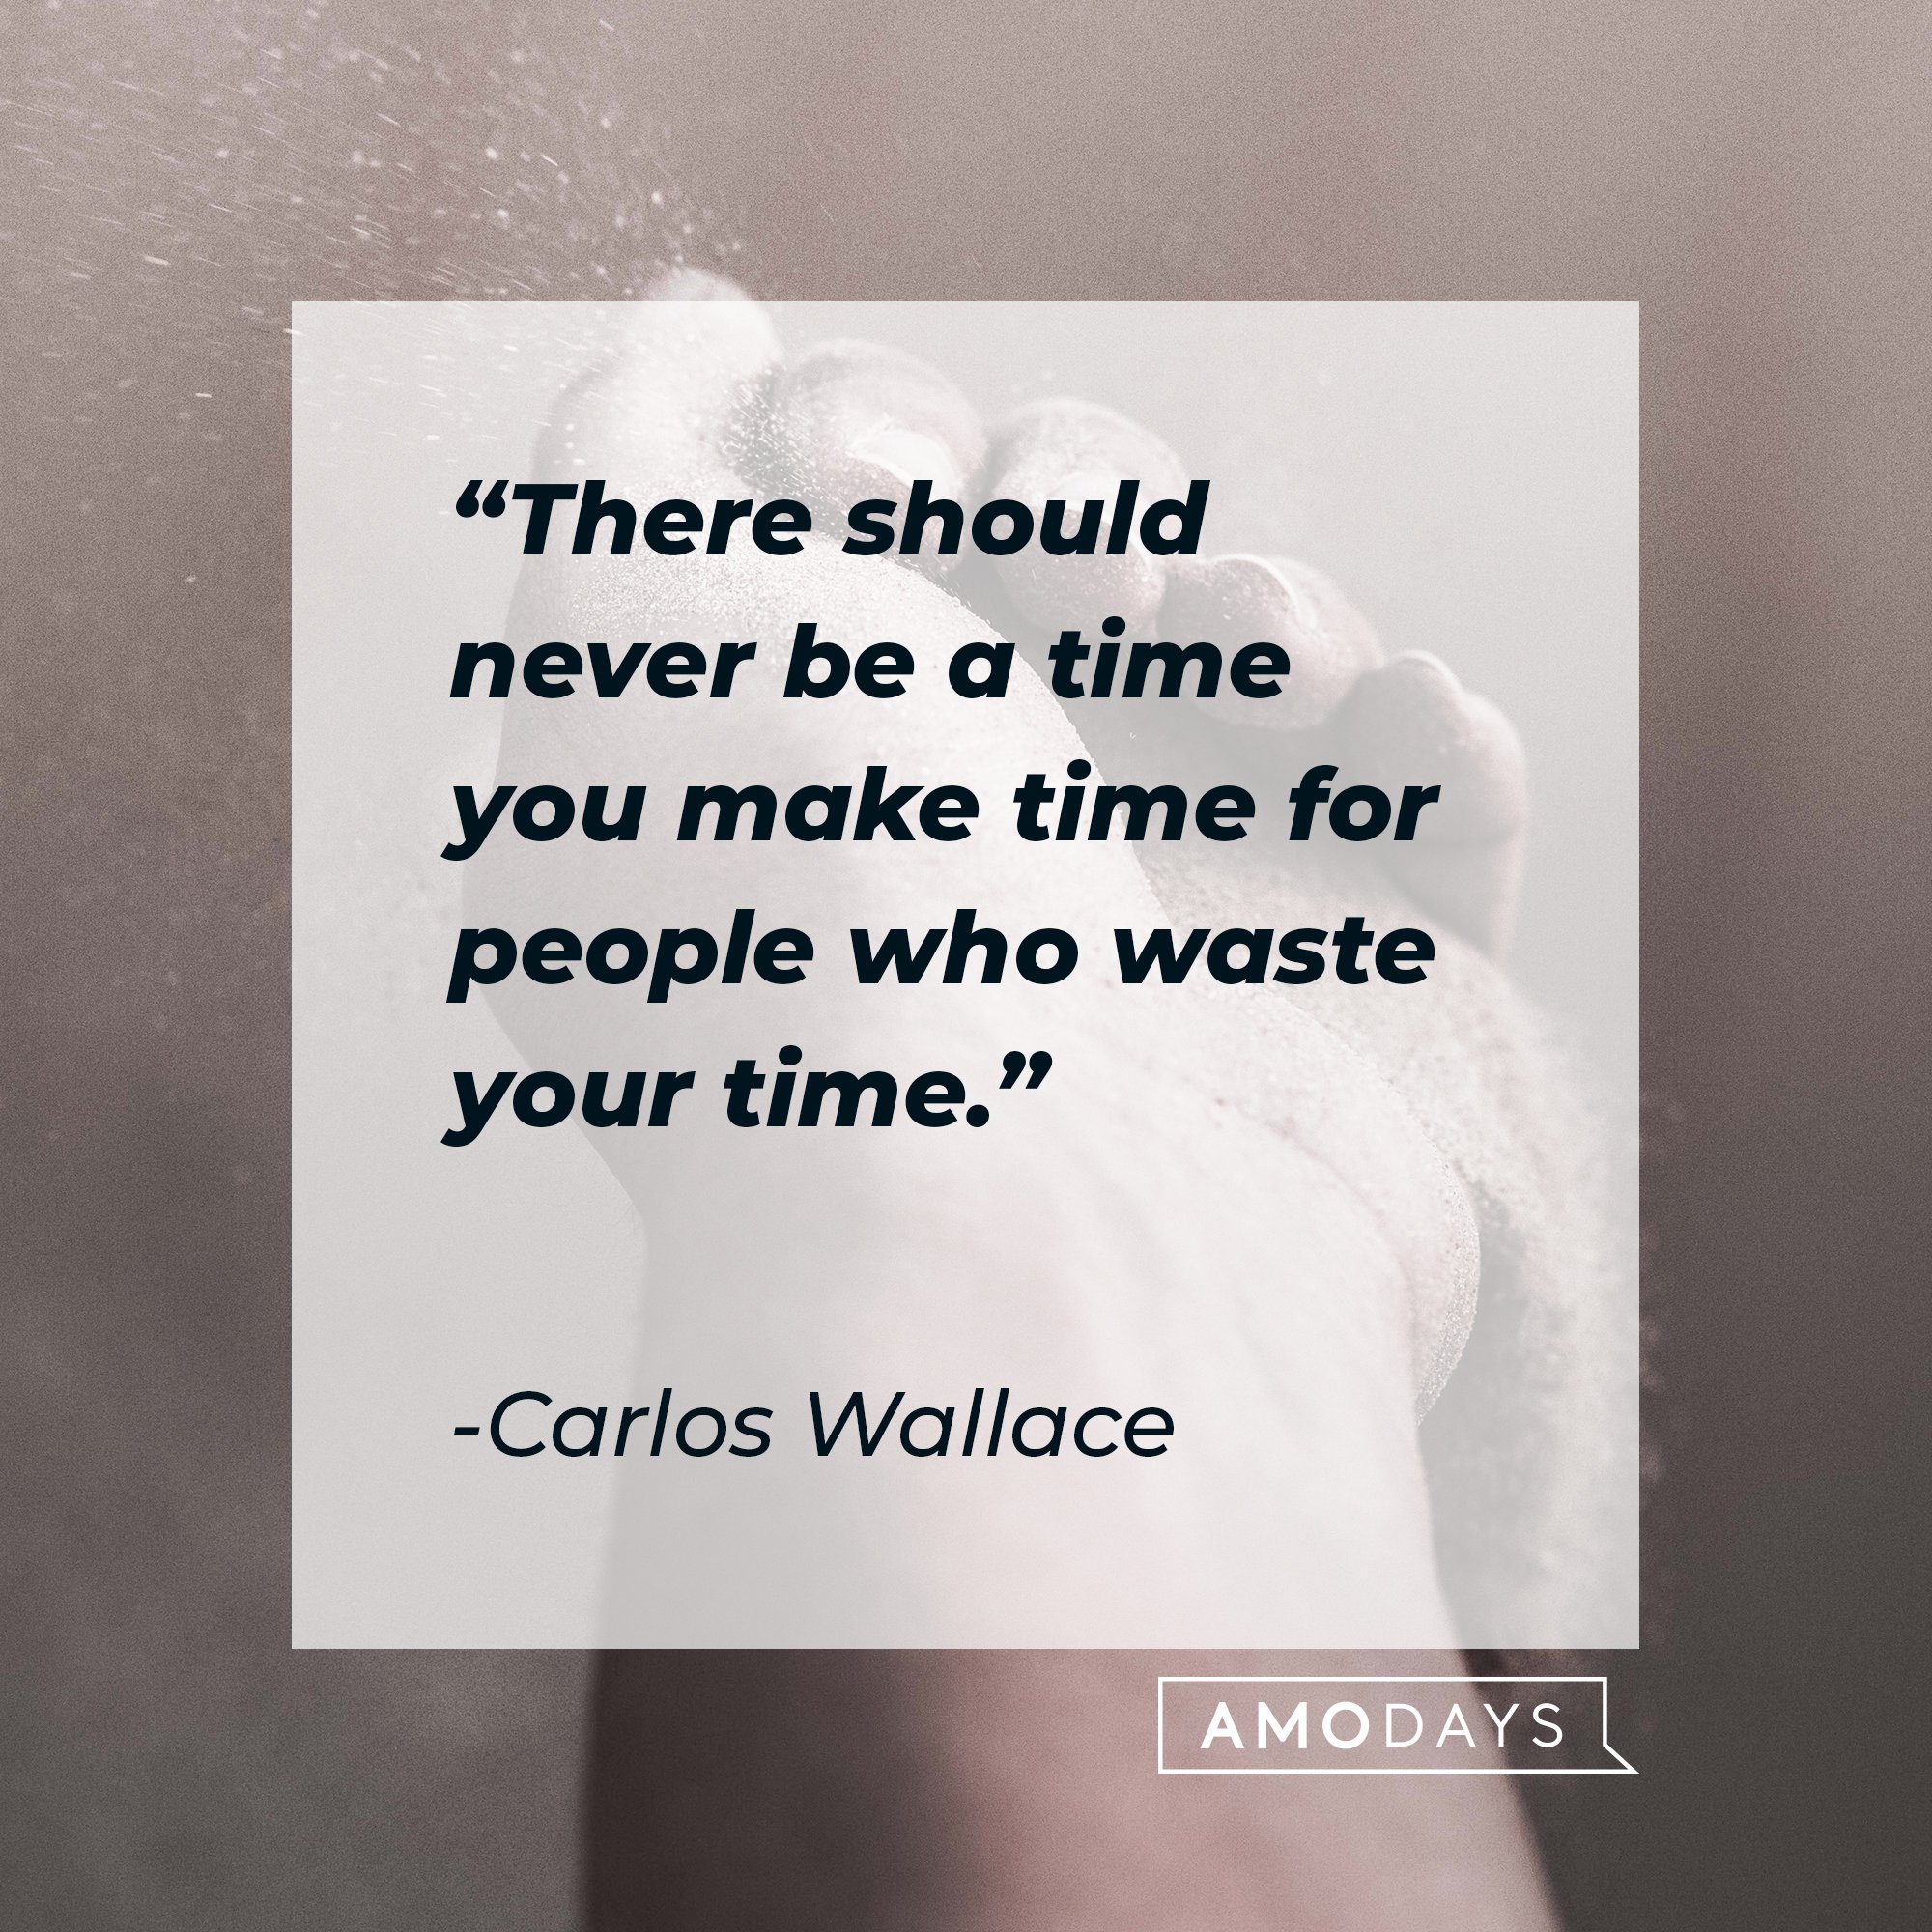 Carlos Wallace's quote: "There should never be a time you make time for people who waste your time." | Image: AmoDays   